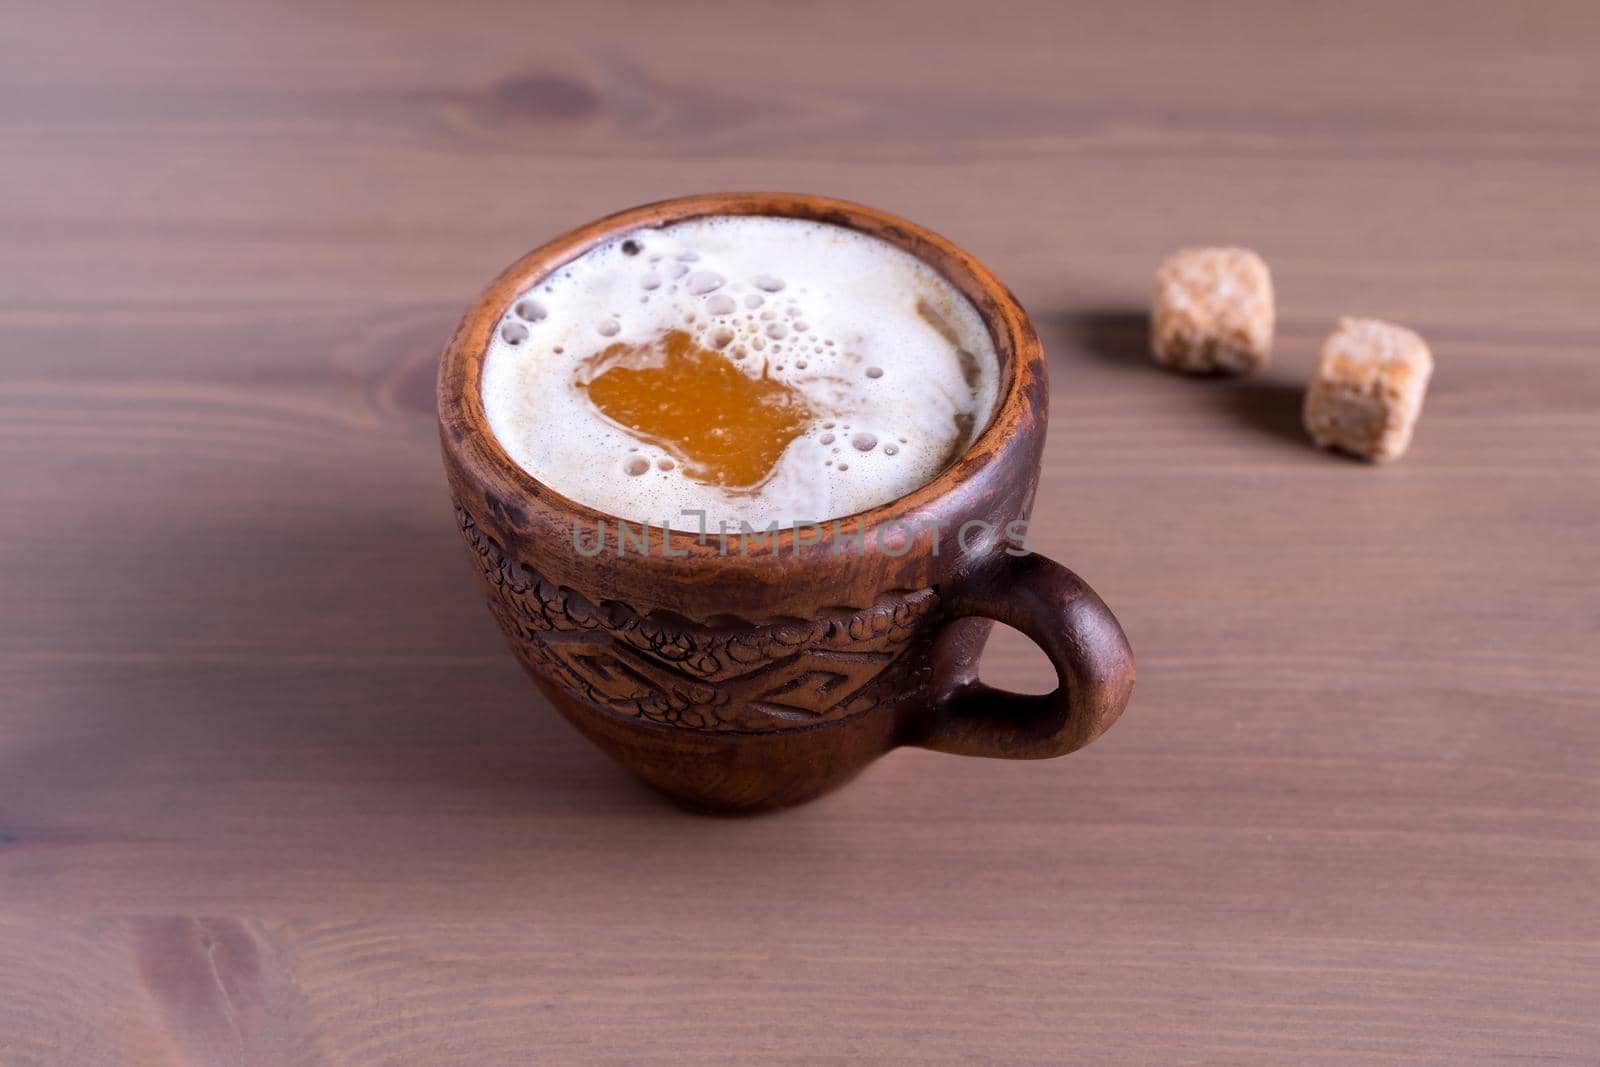 Coffee with milk in a fired earthenware mug with cane sugar pieces by OlgaGubskaya